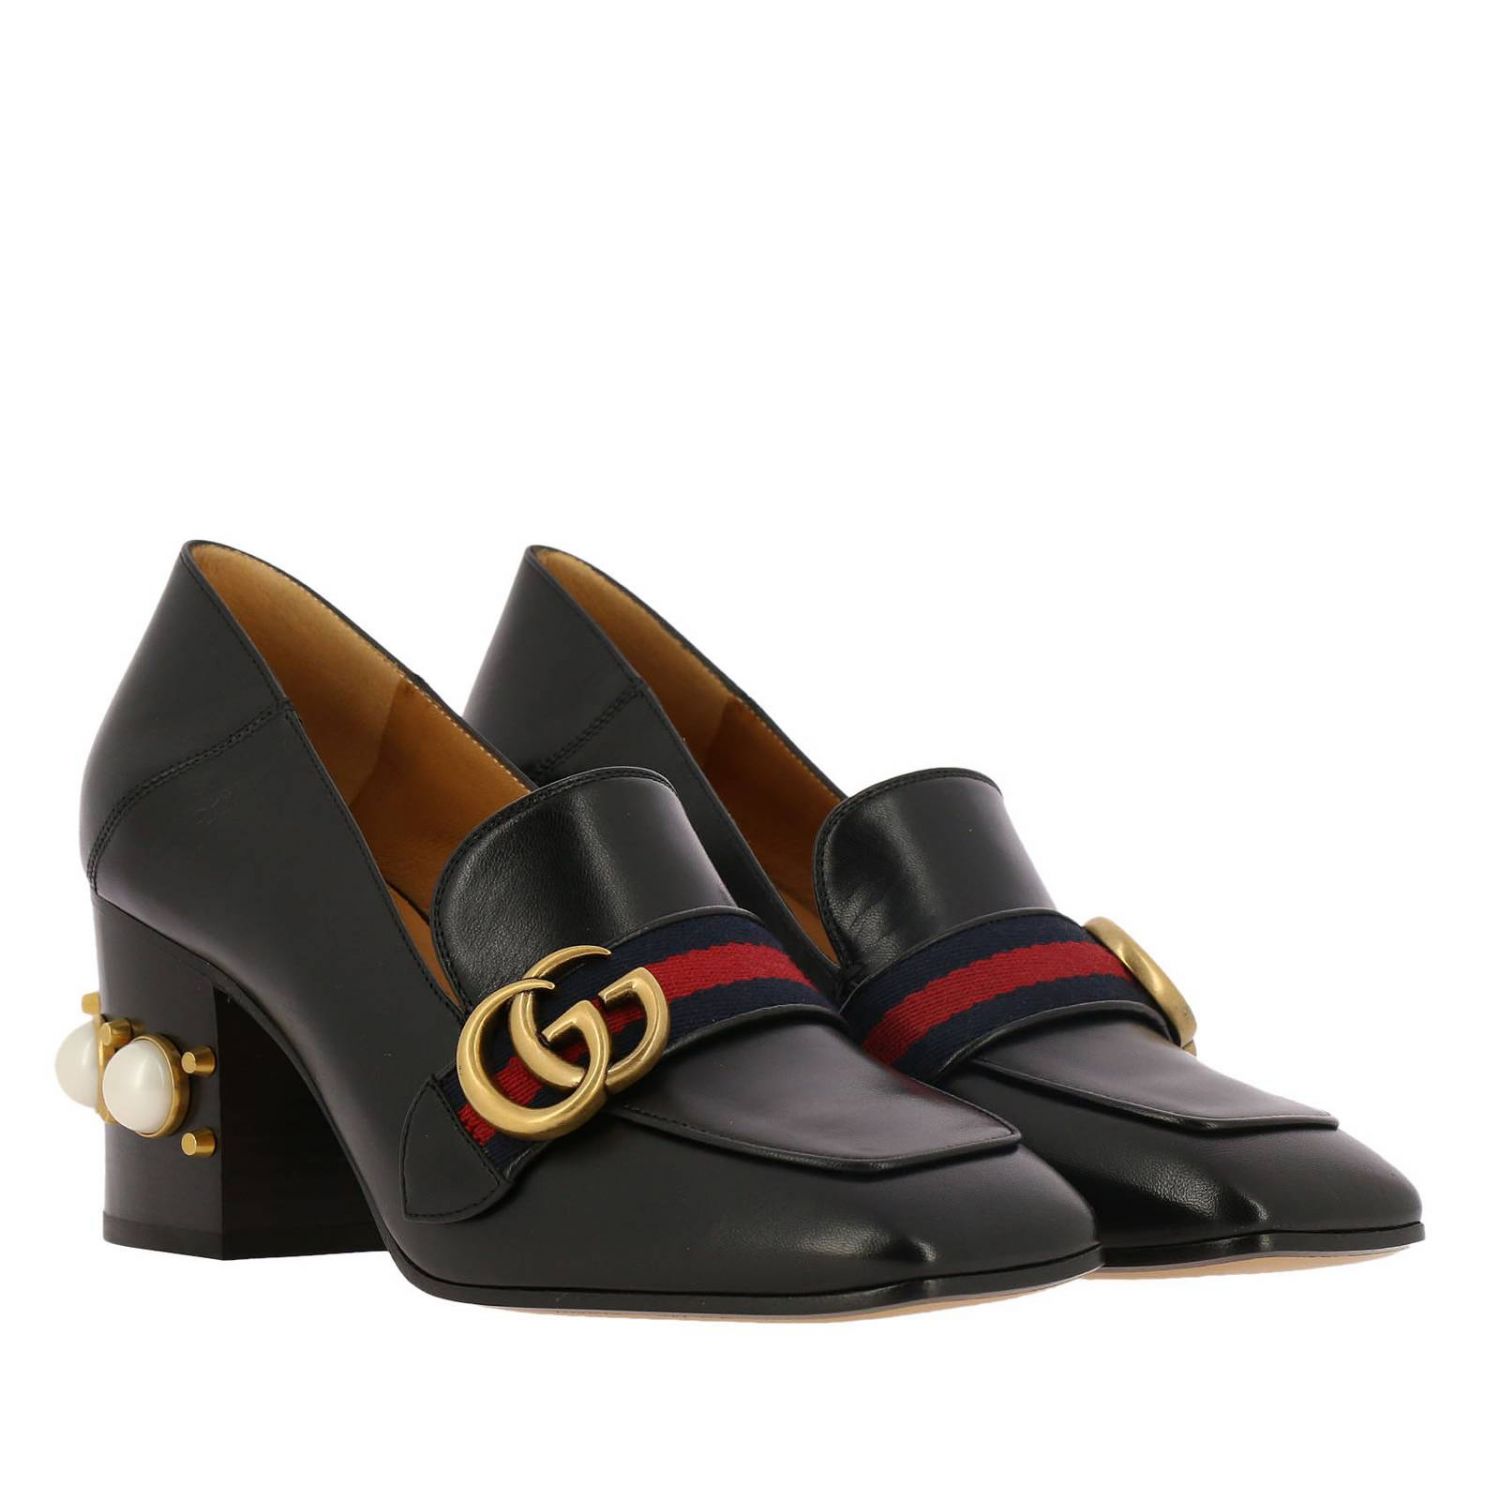 Buy > gucci high heel shoes > in stock